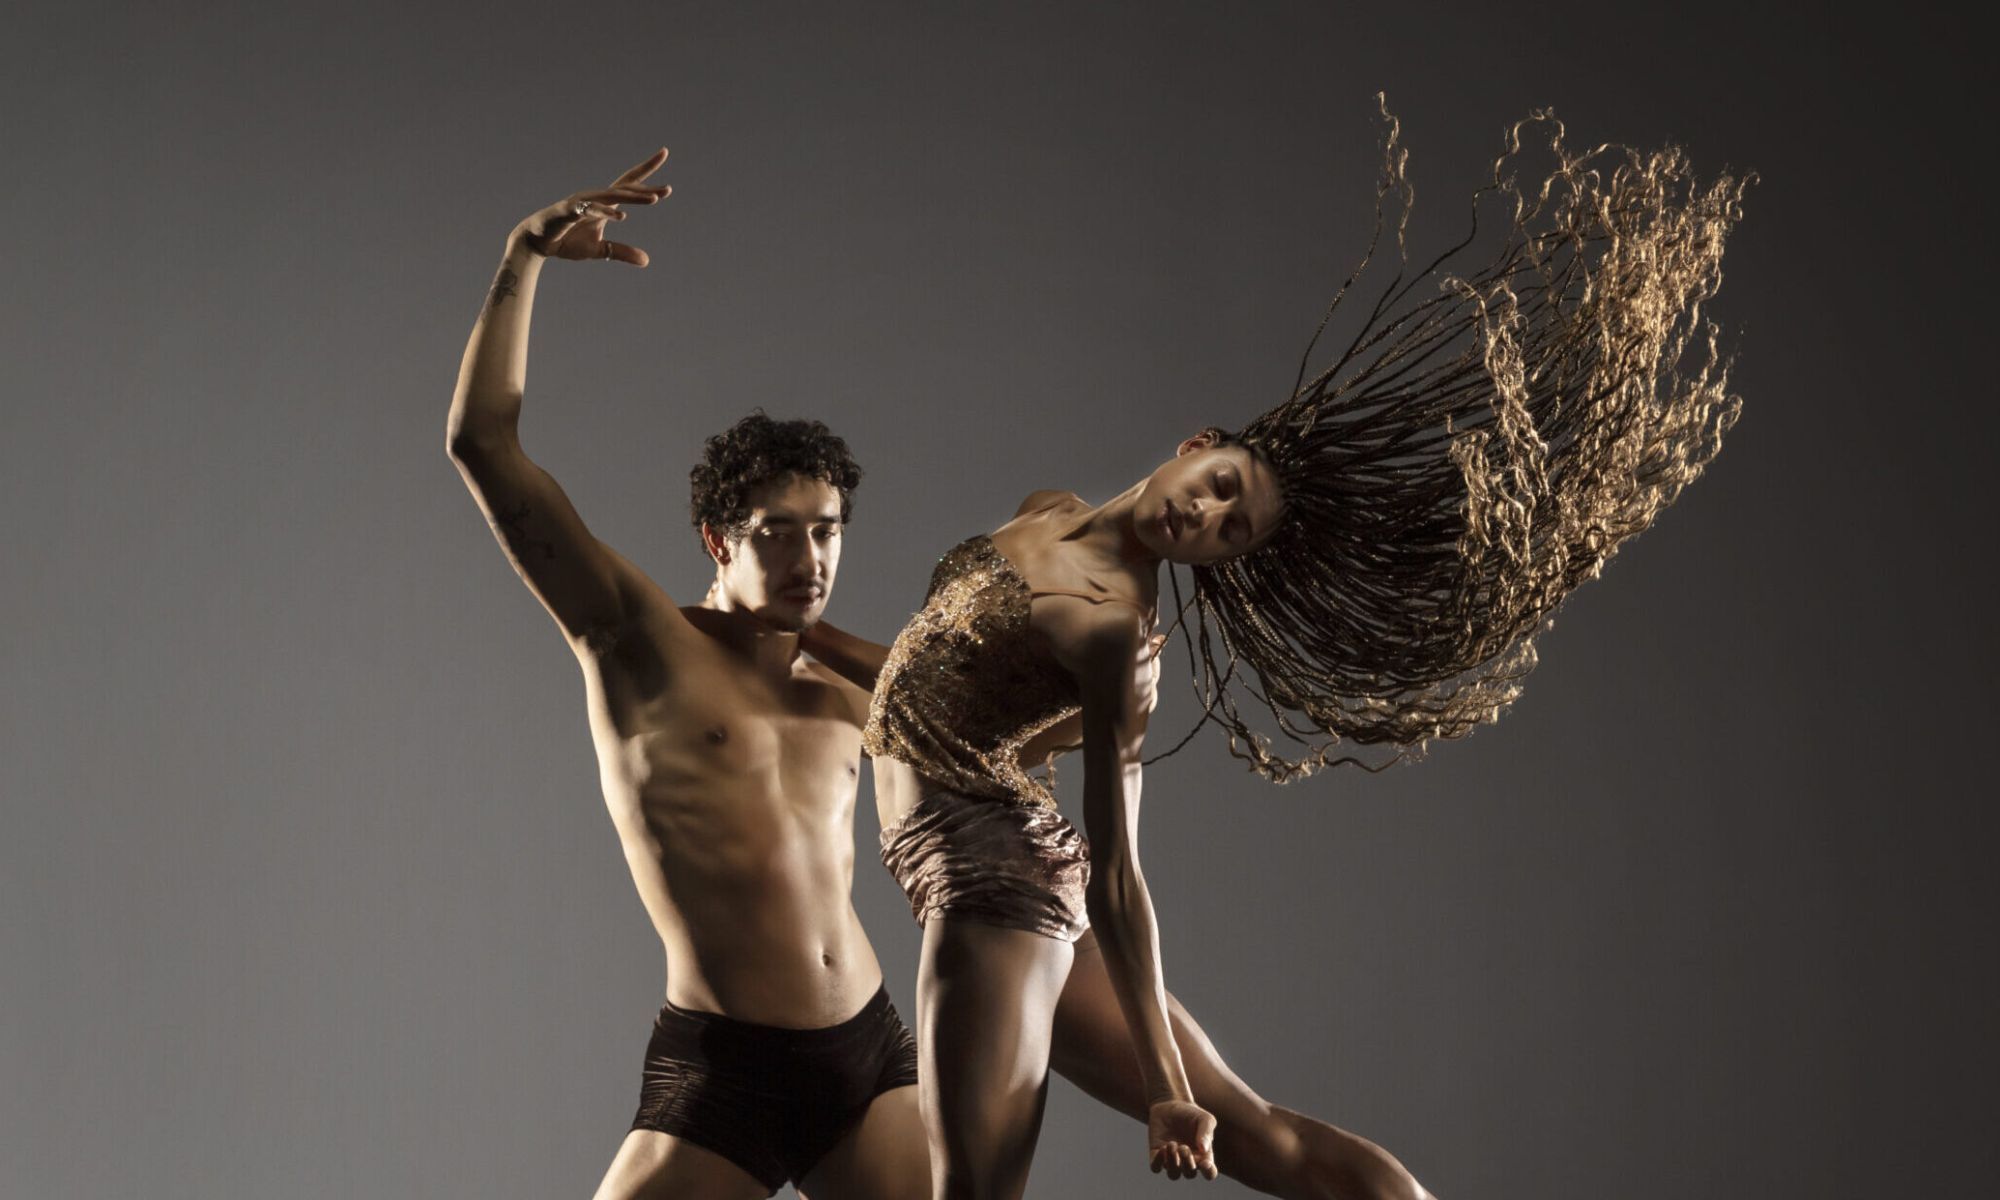 Two dancers pose against a grey backdrop